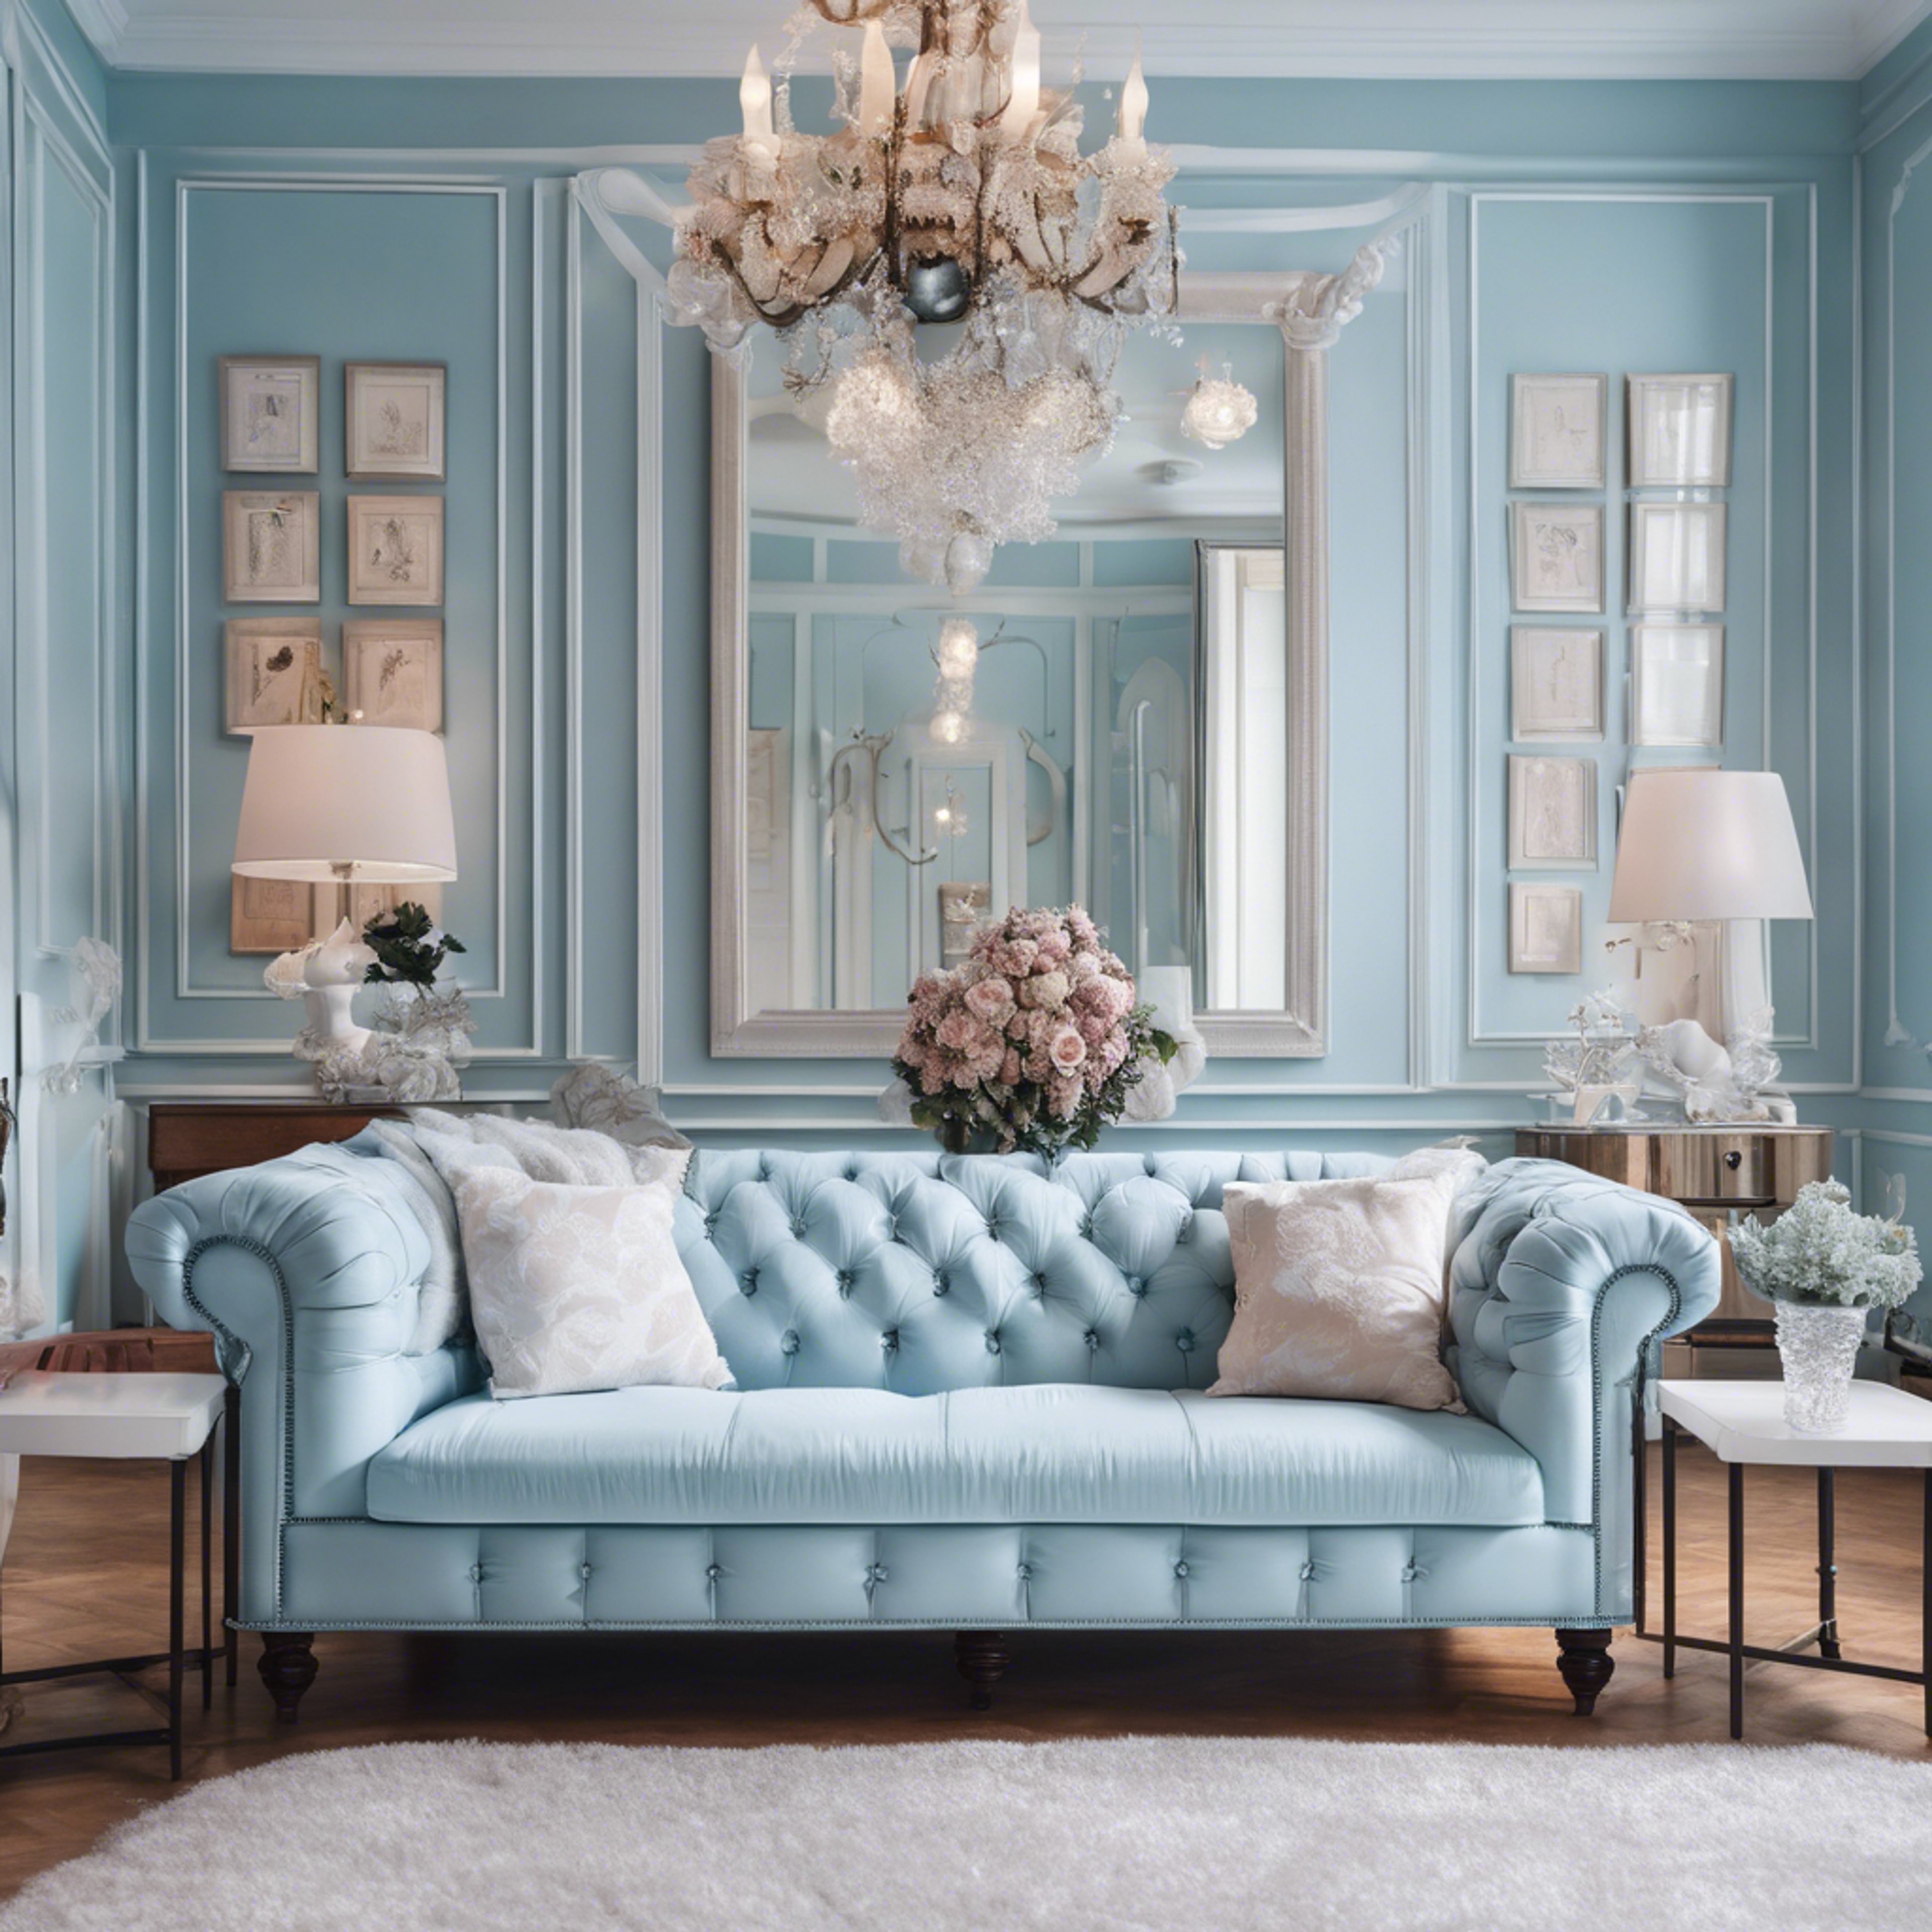 A preppy styled room with pastel blue wallpaper, Chesterfield sofa, and white French style furniture.” Tapet[3904fac215ba4f1eaa62]